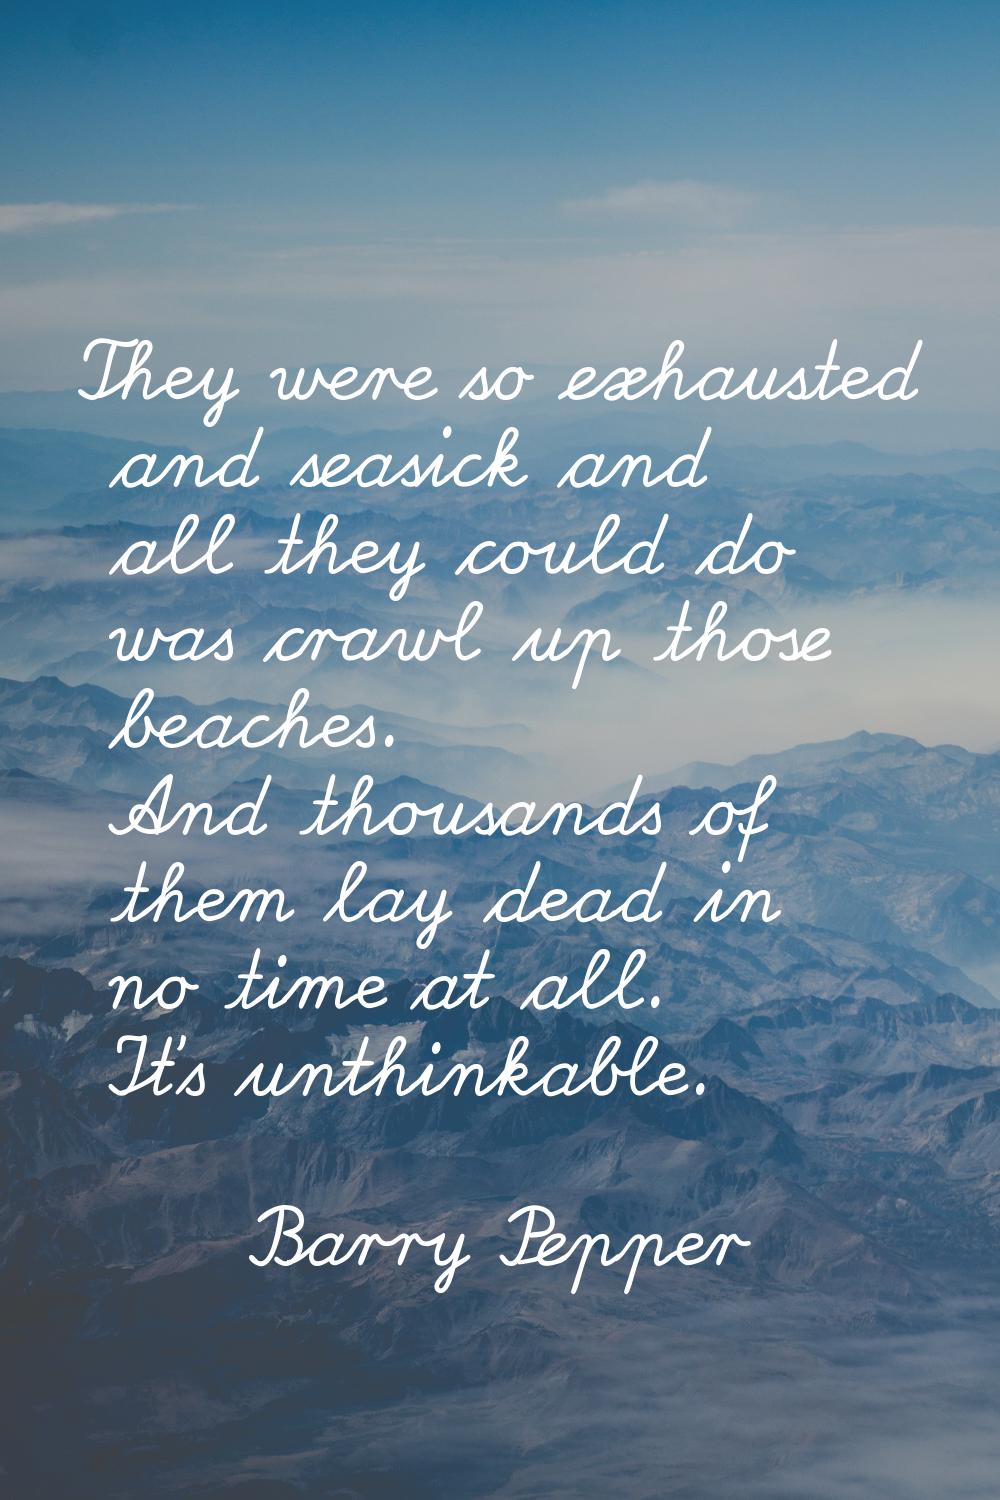 They were so exhausted and seasick and all they could do was crawl up those beaches. And thousands 